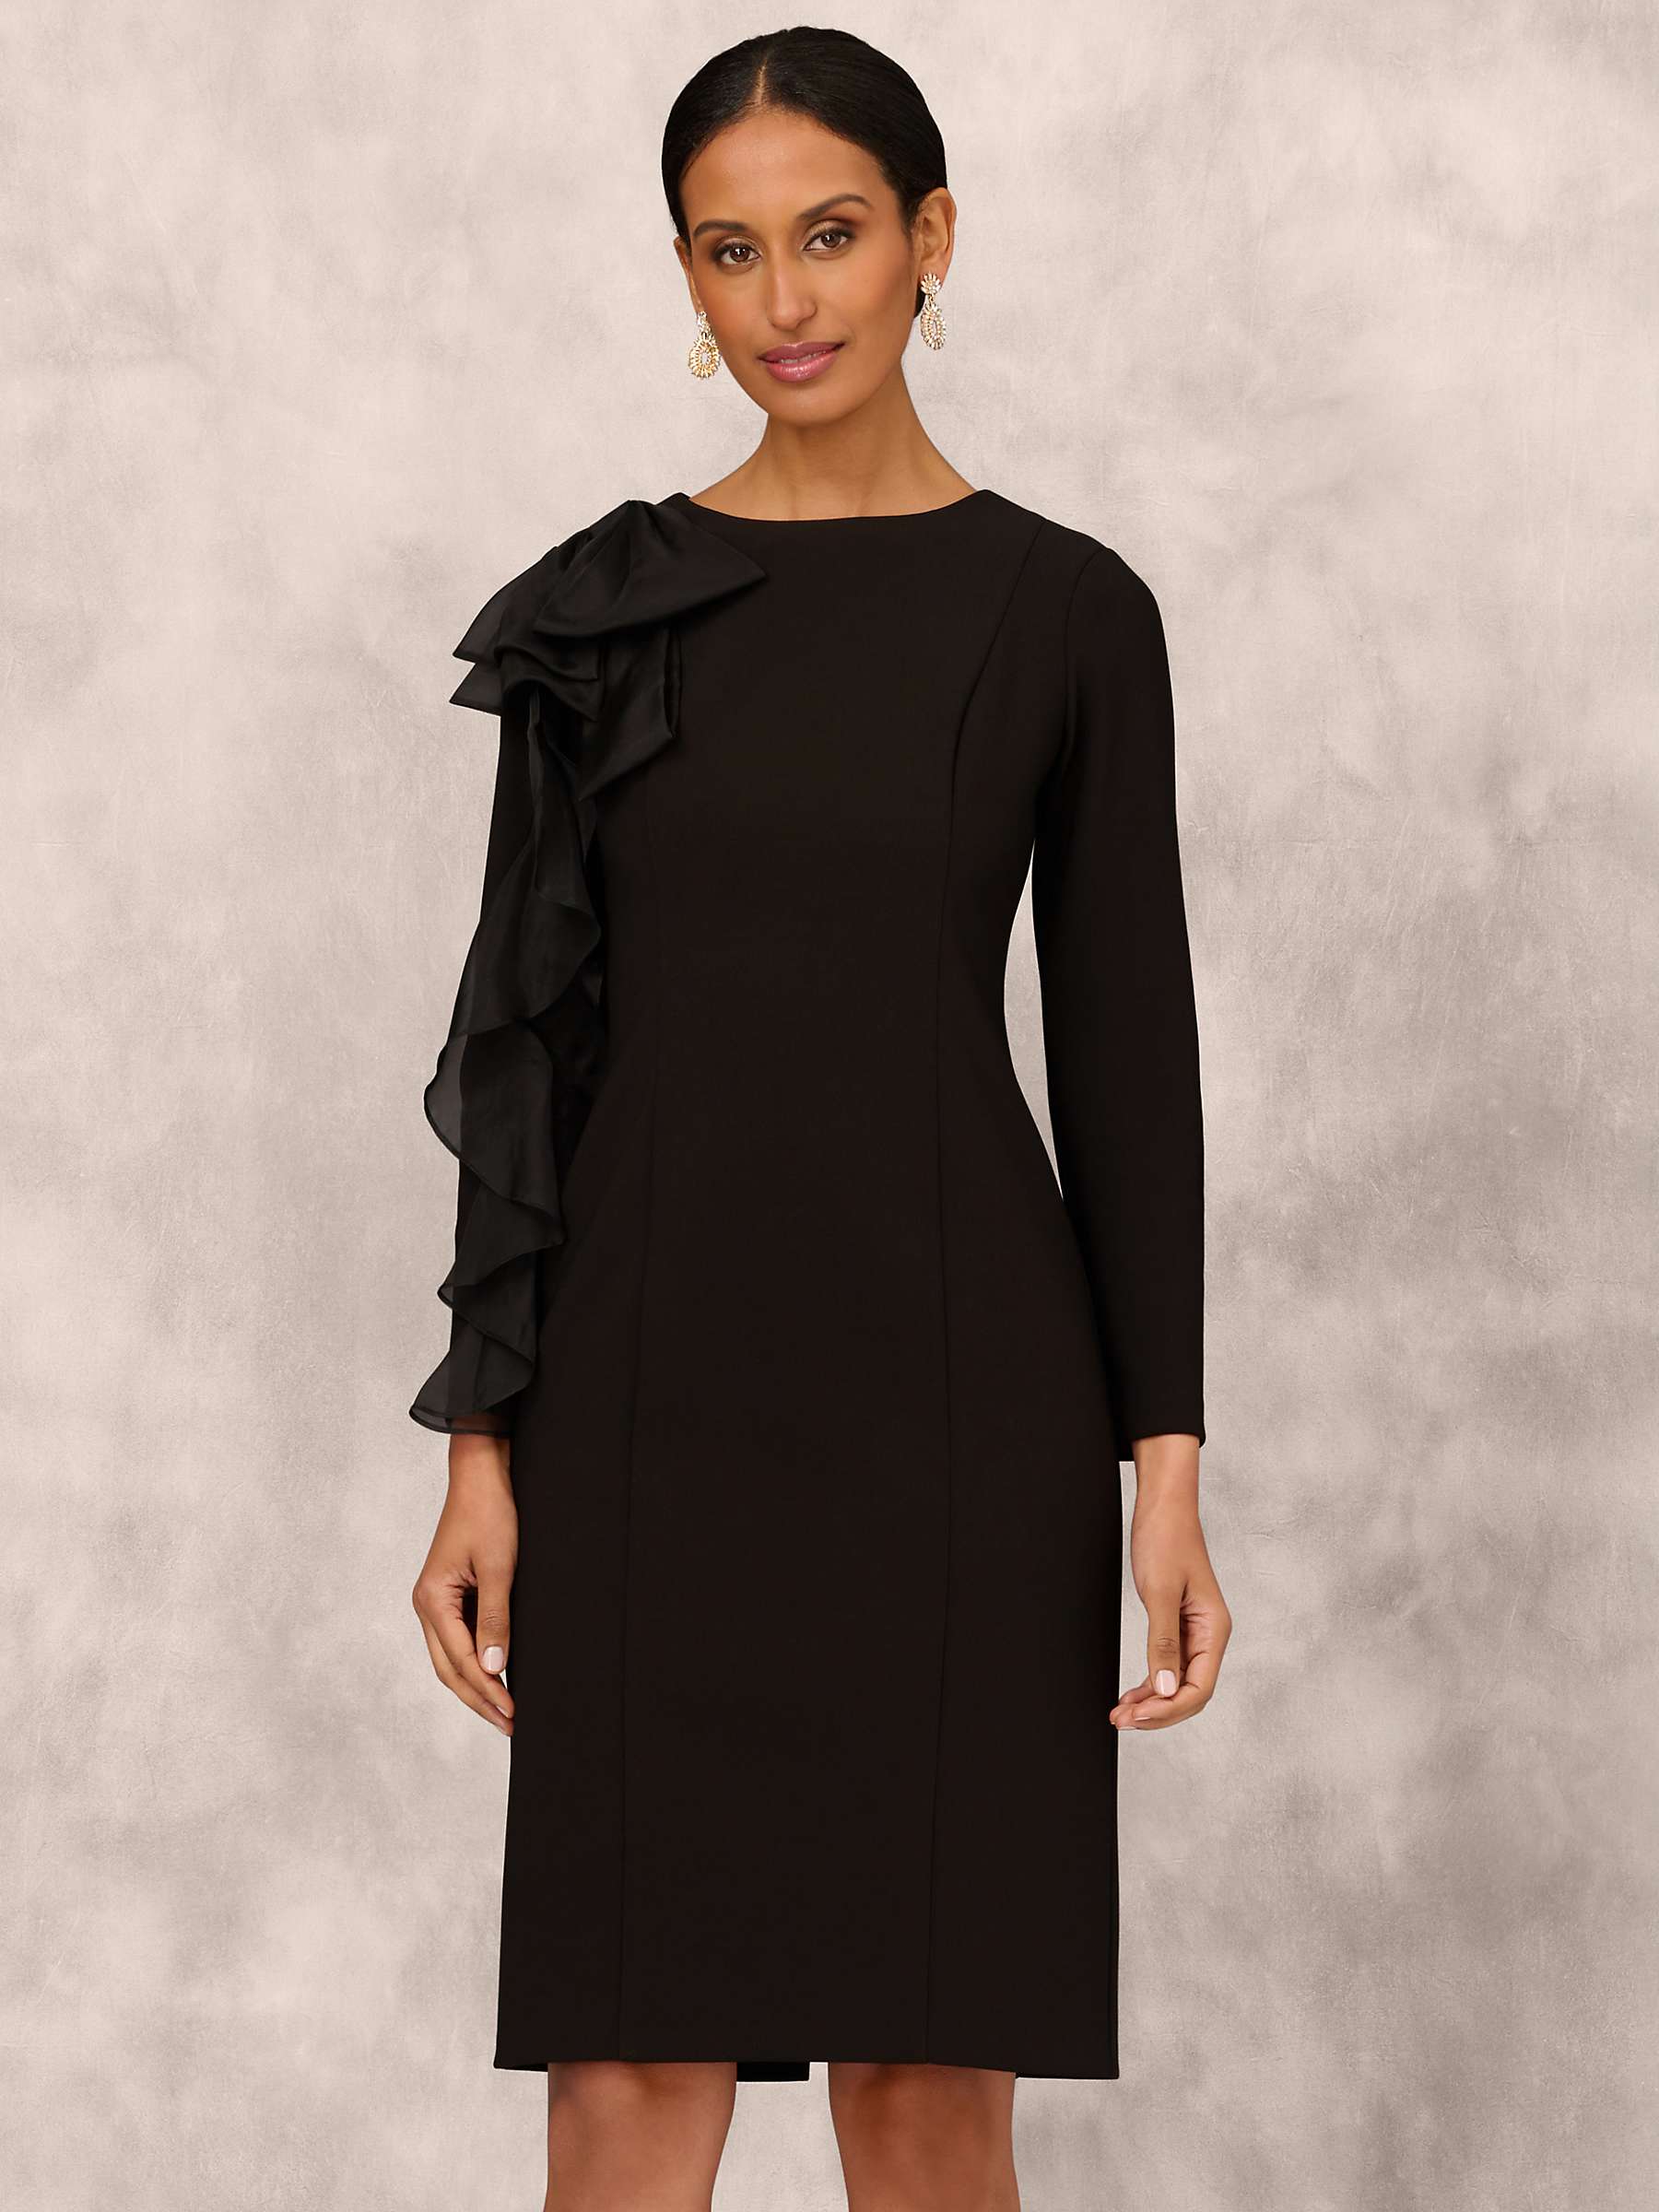 Buy Adrianna Papell Aidan Mattox by Adrianna Papell Midi Cocktail Dress, Black Online at johnlewis.com